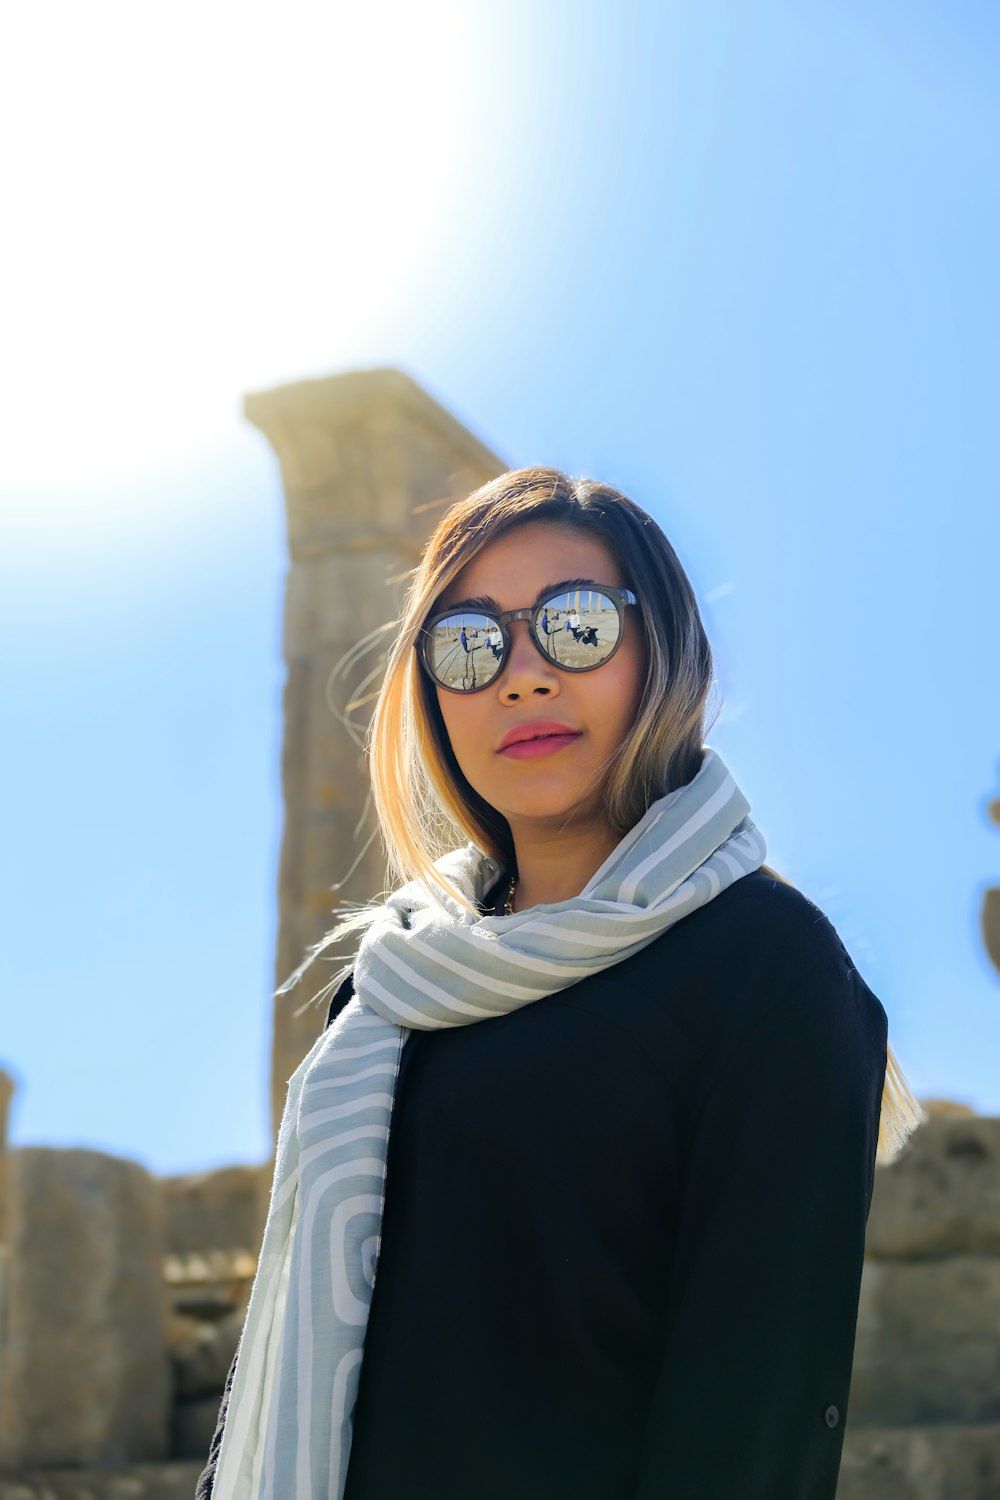 a woman wearing sunglasses standing in front of a stone structure